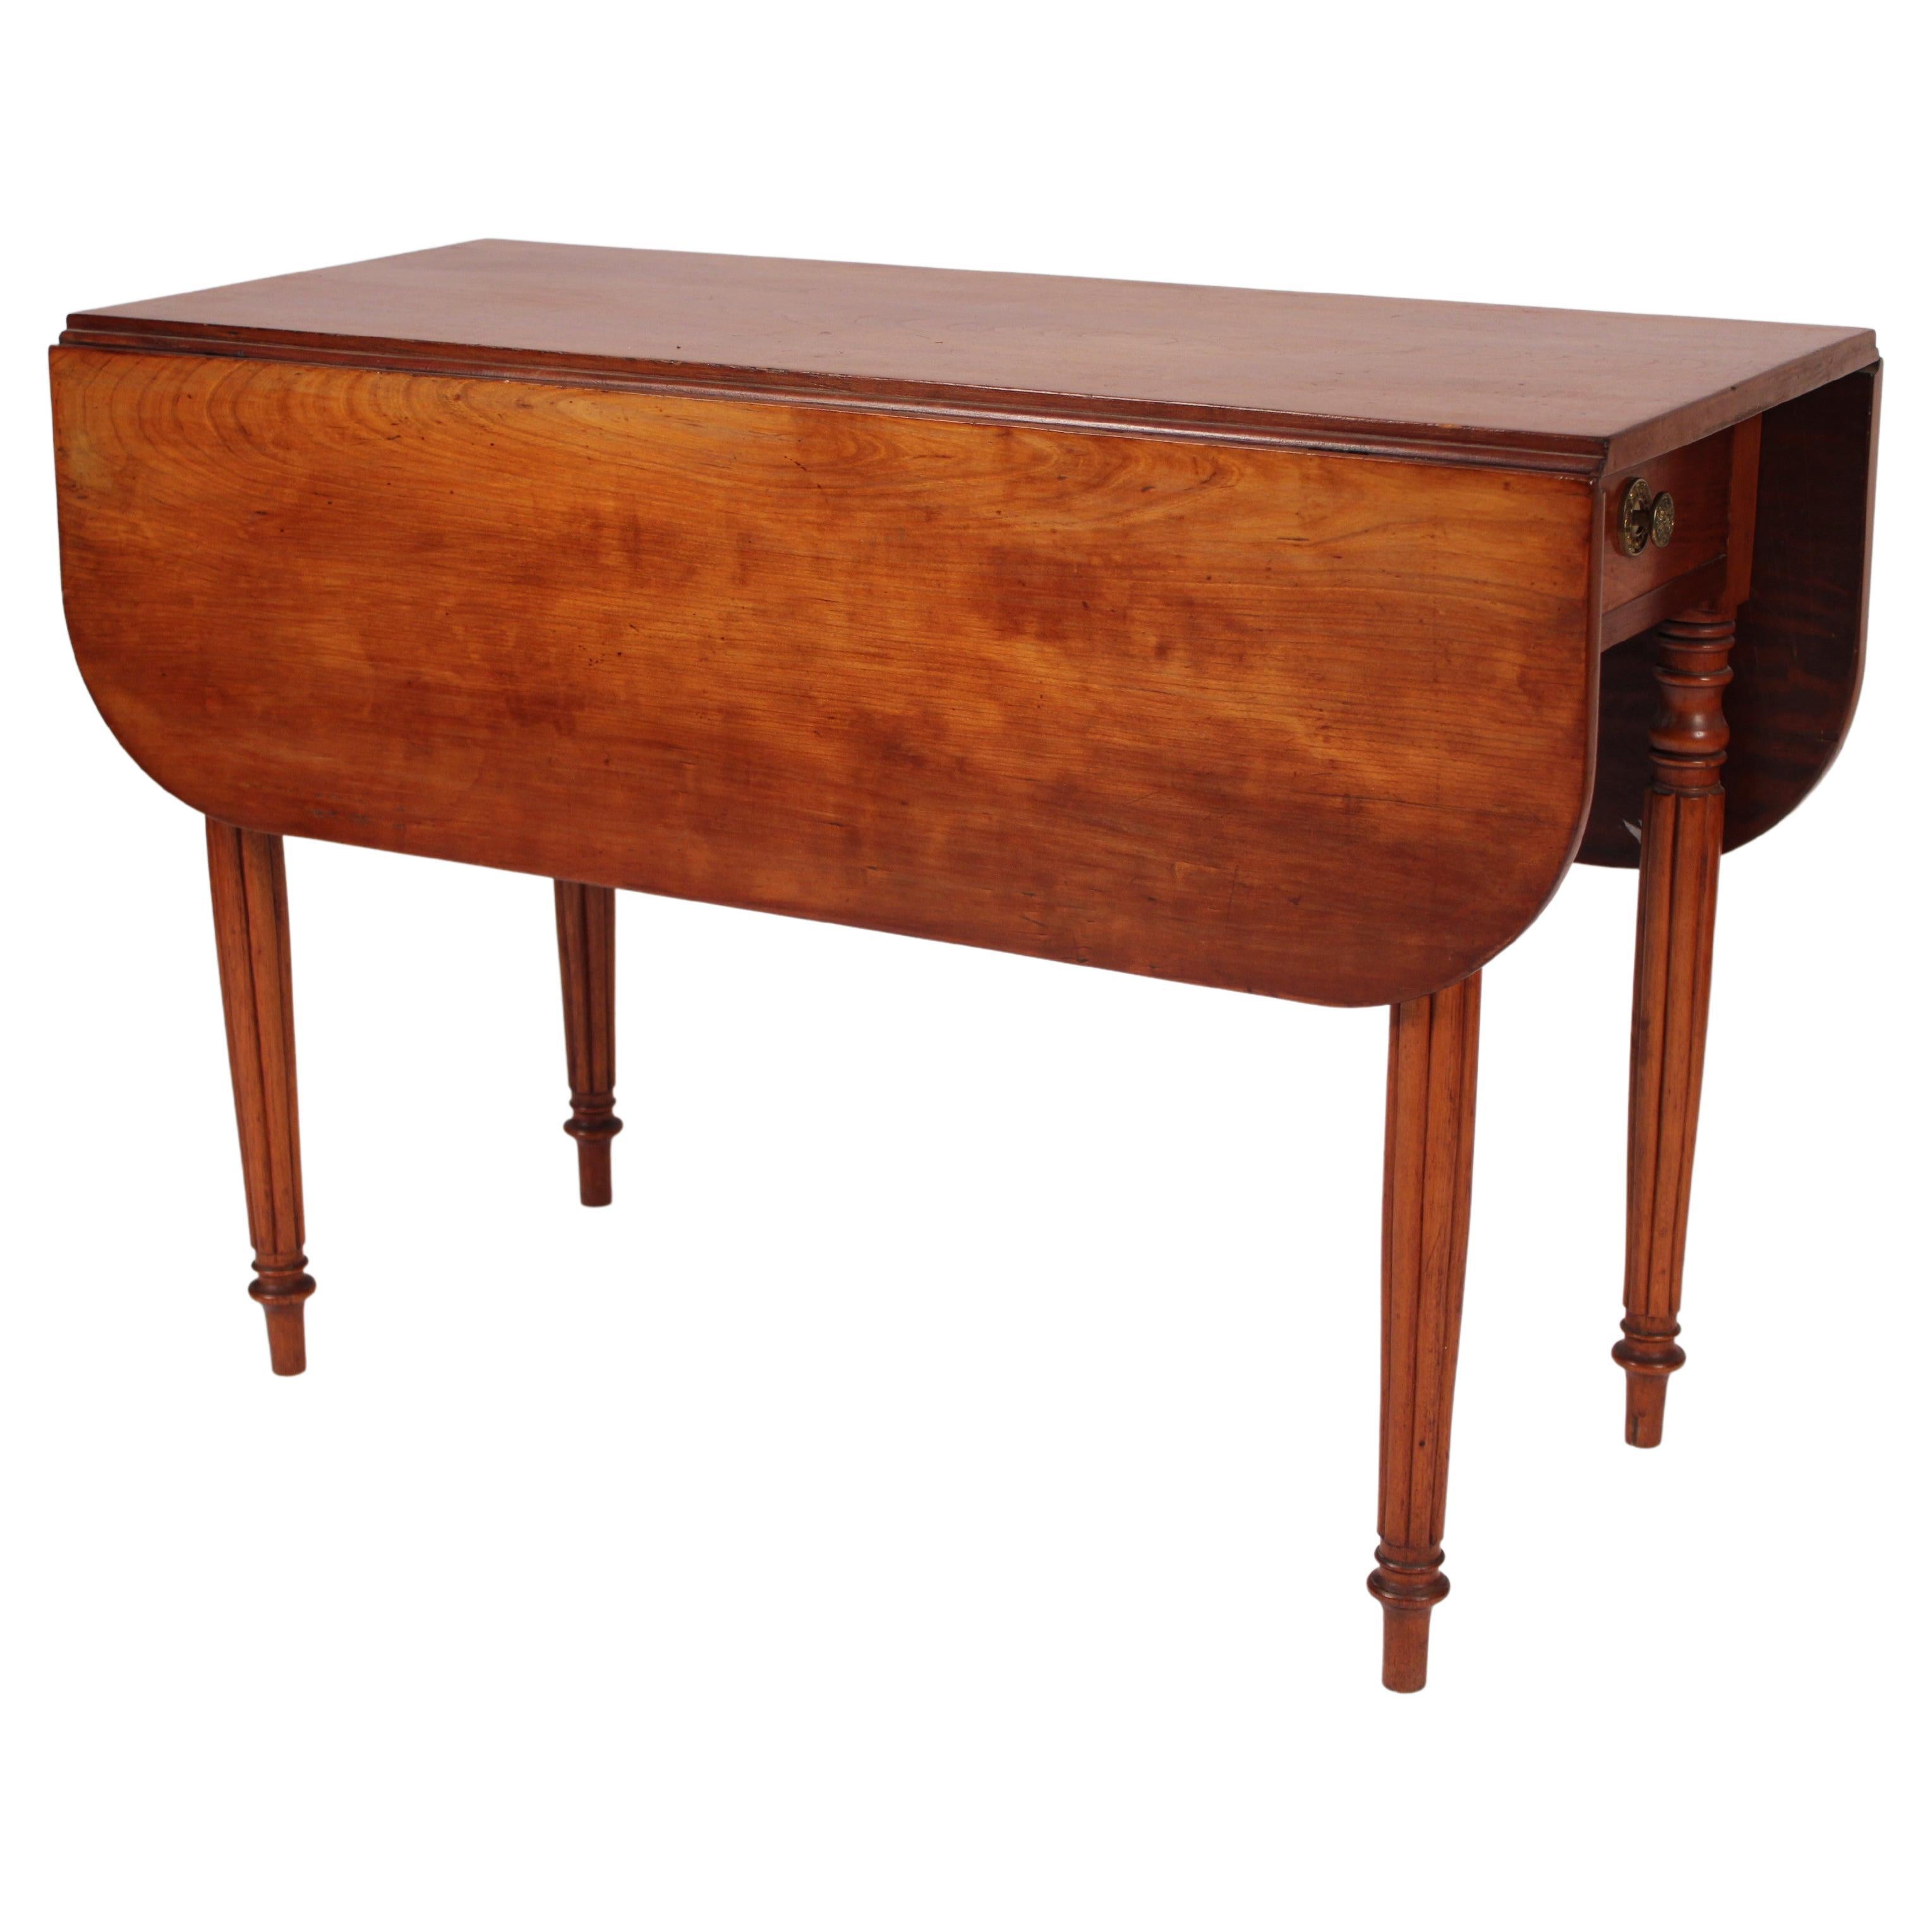 American Classical Style Cherry Wood Drop Leaf Table